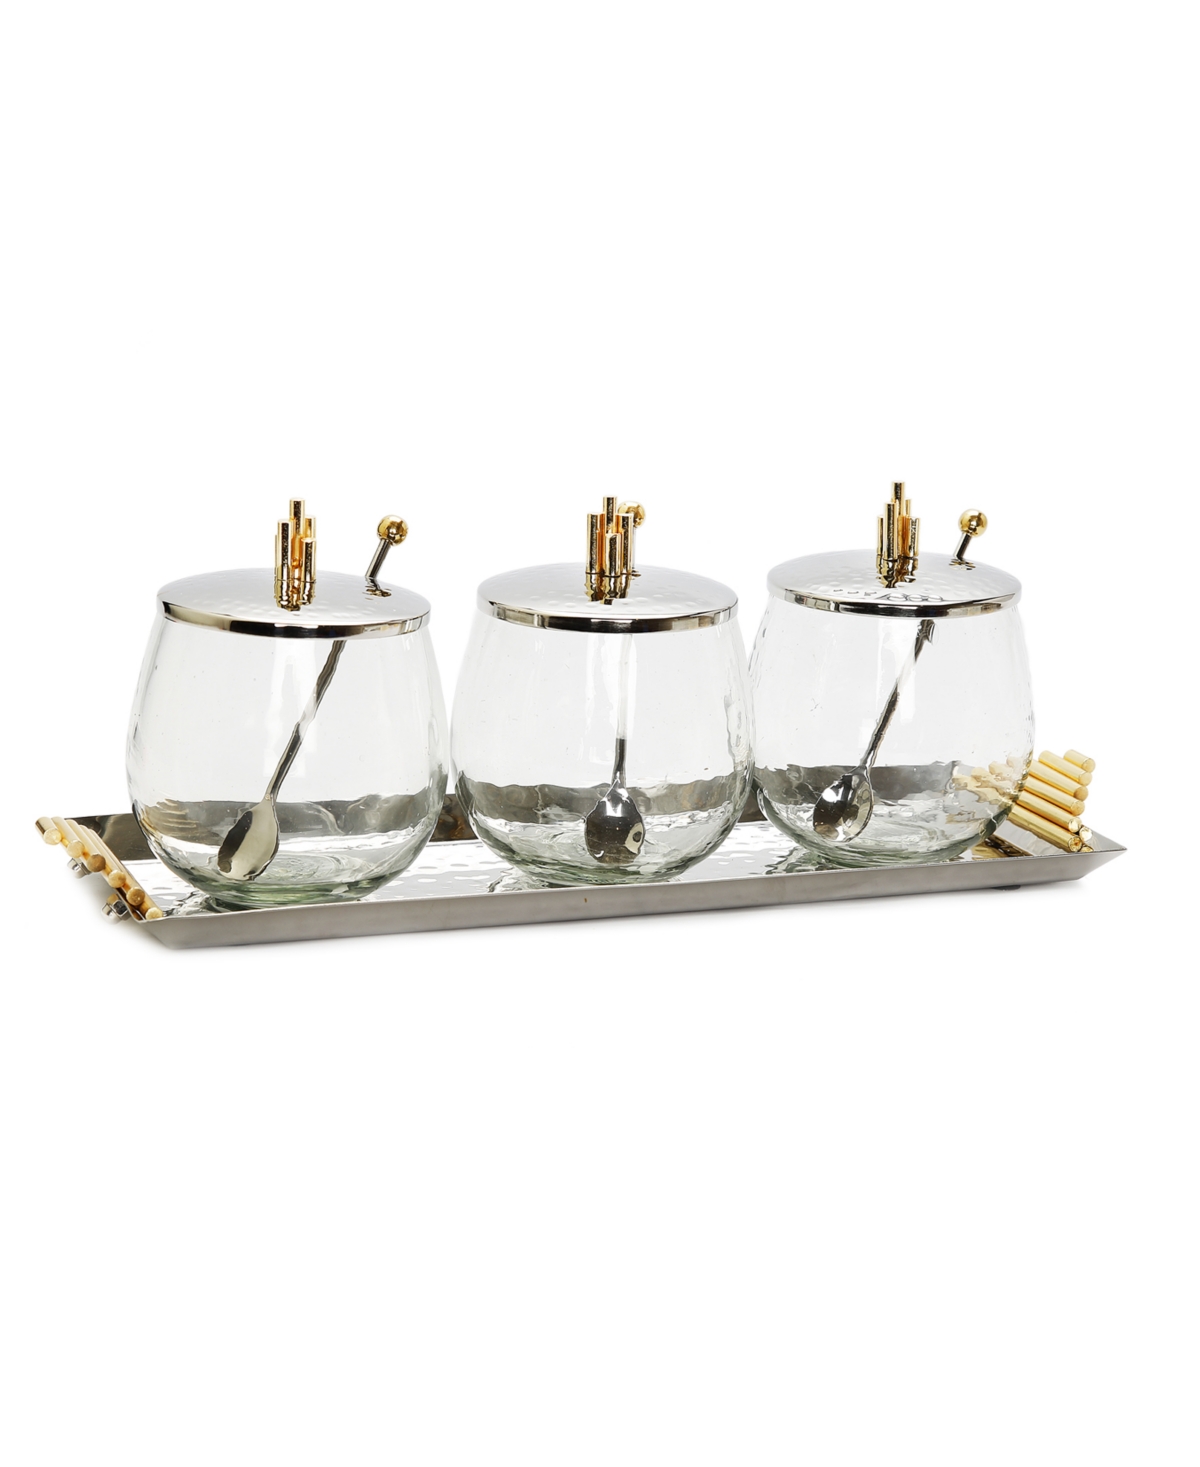 Hammered Tray with 3 Glass Bowls Symmetrical Design, Set of 10 - Gold